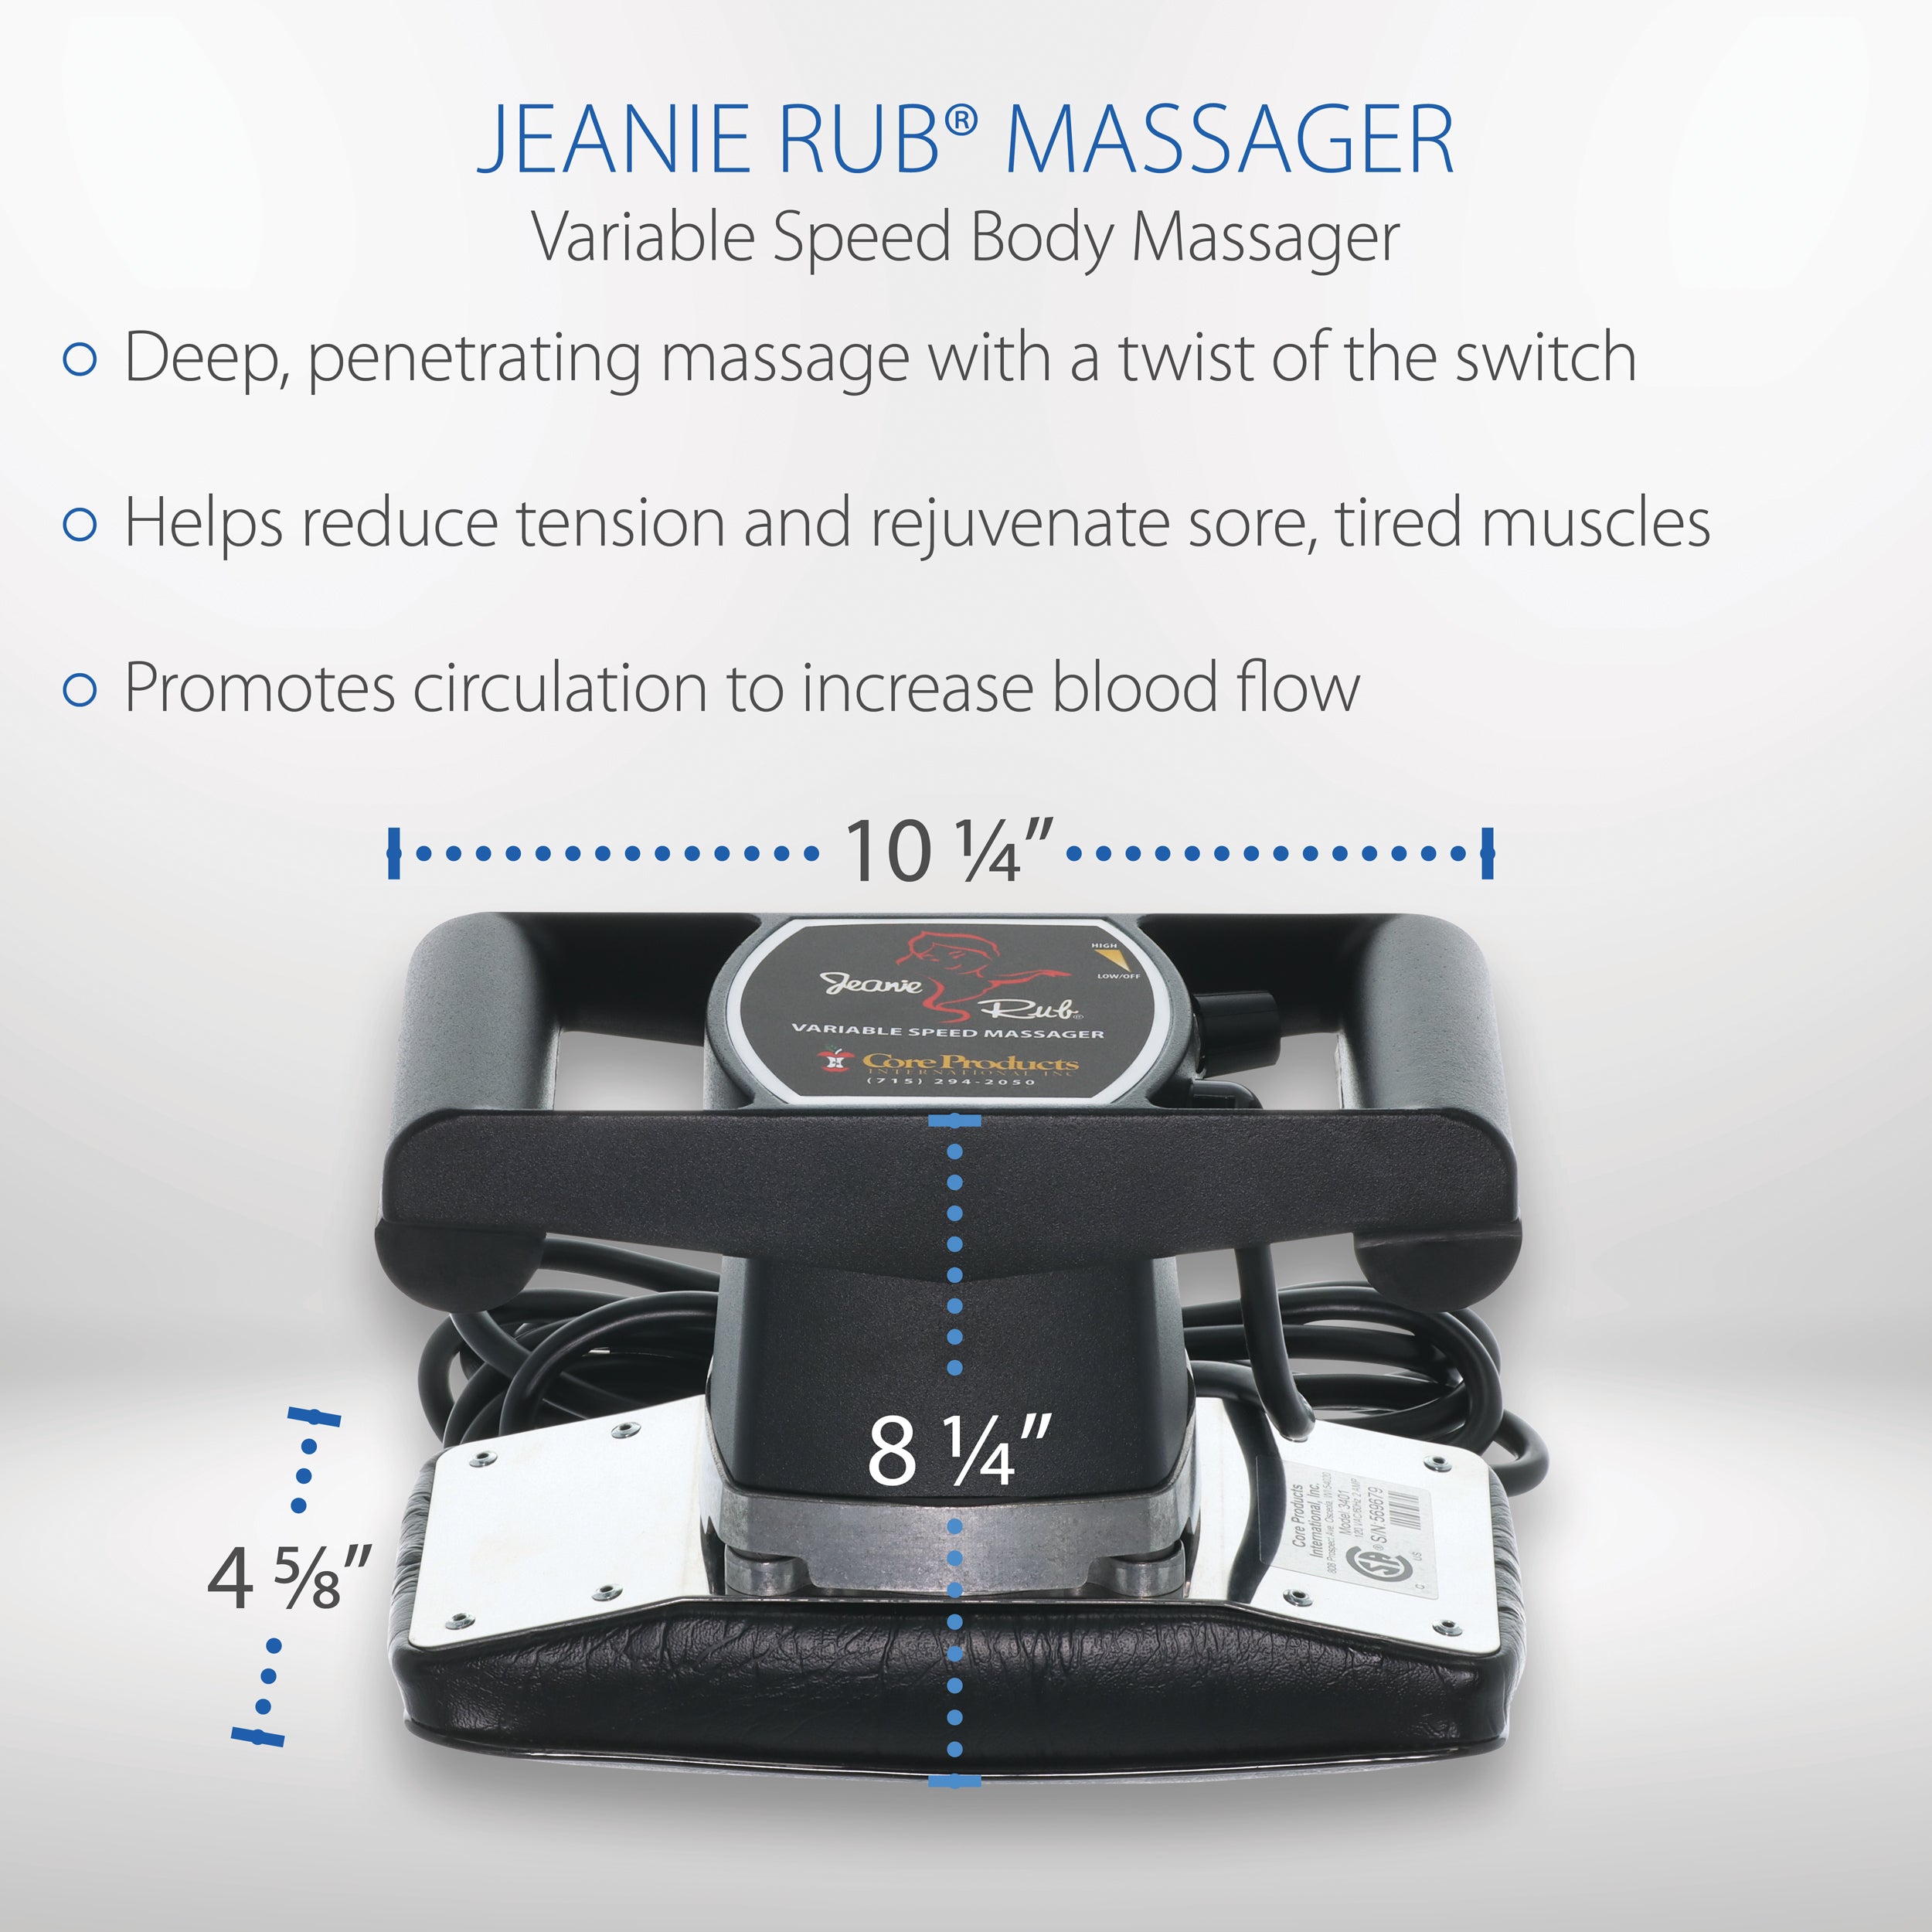 Jeanie Rub Massager - Deluxe Package